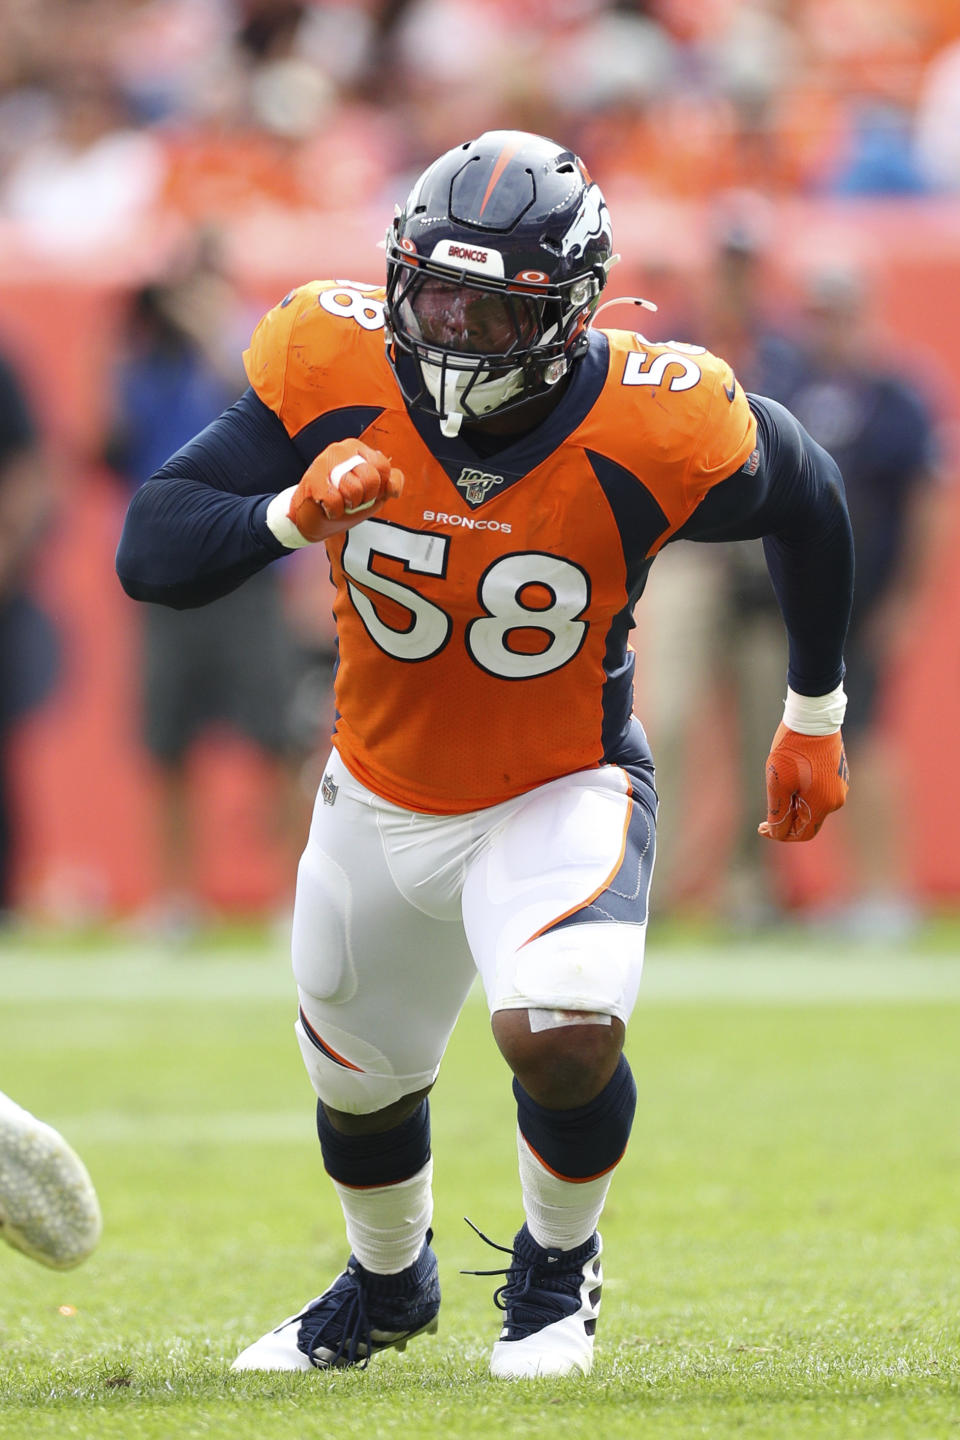 Denver Broncos outside linebacker Von Miller (58) takes a defensive position during an NFL game against the Chicago Bears, Sunday Sept. 15, 2019, in Denver. The Bears defeated the Broncos 16-14. (Margaret Bowles via AP)